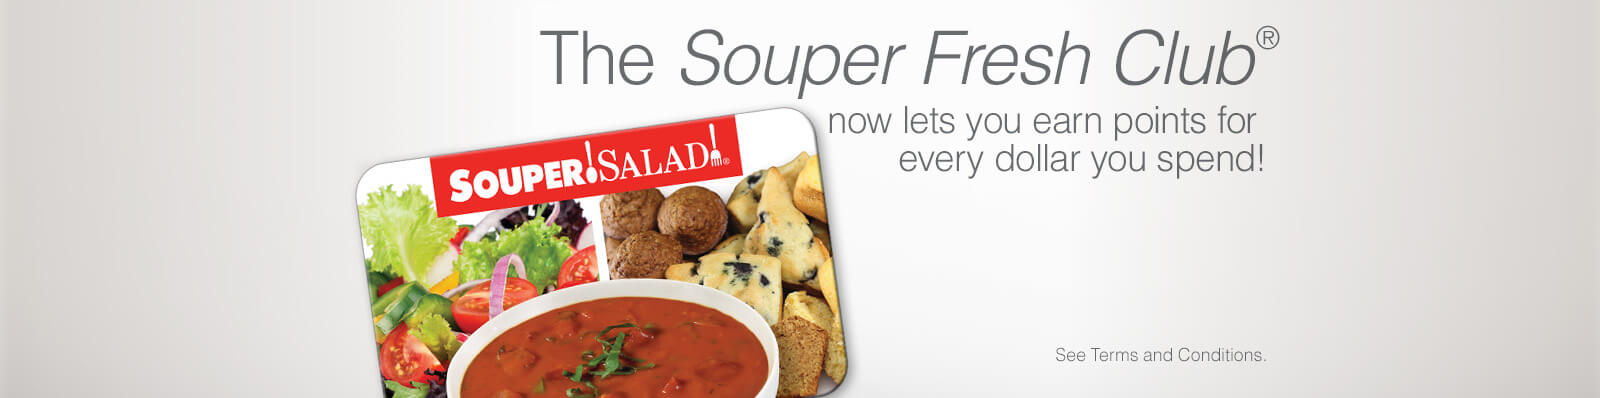 Image saying to Join the Souper Fresh Club to earn Rewards